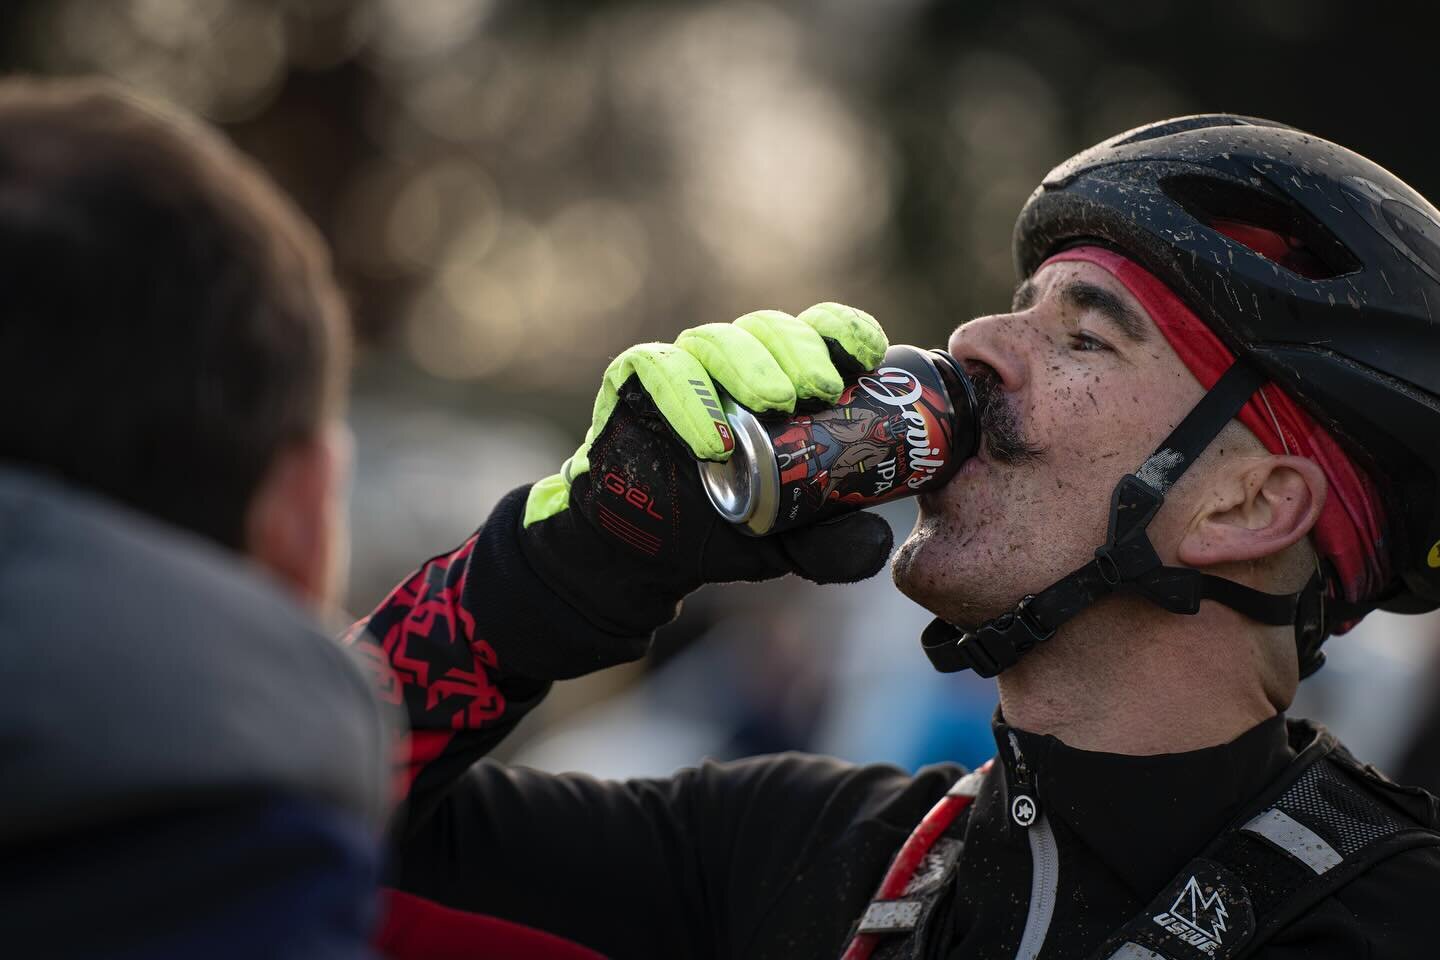 99 DAYS TO GO

Try to contain your excitement.
Don&rsquo;t let the anticipation distract you from your training.
Remain focused on your race goals.

The 2024 @littleriversbrewingco race beer is almost decided.
However, further test tasting is require